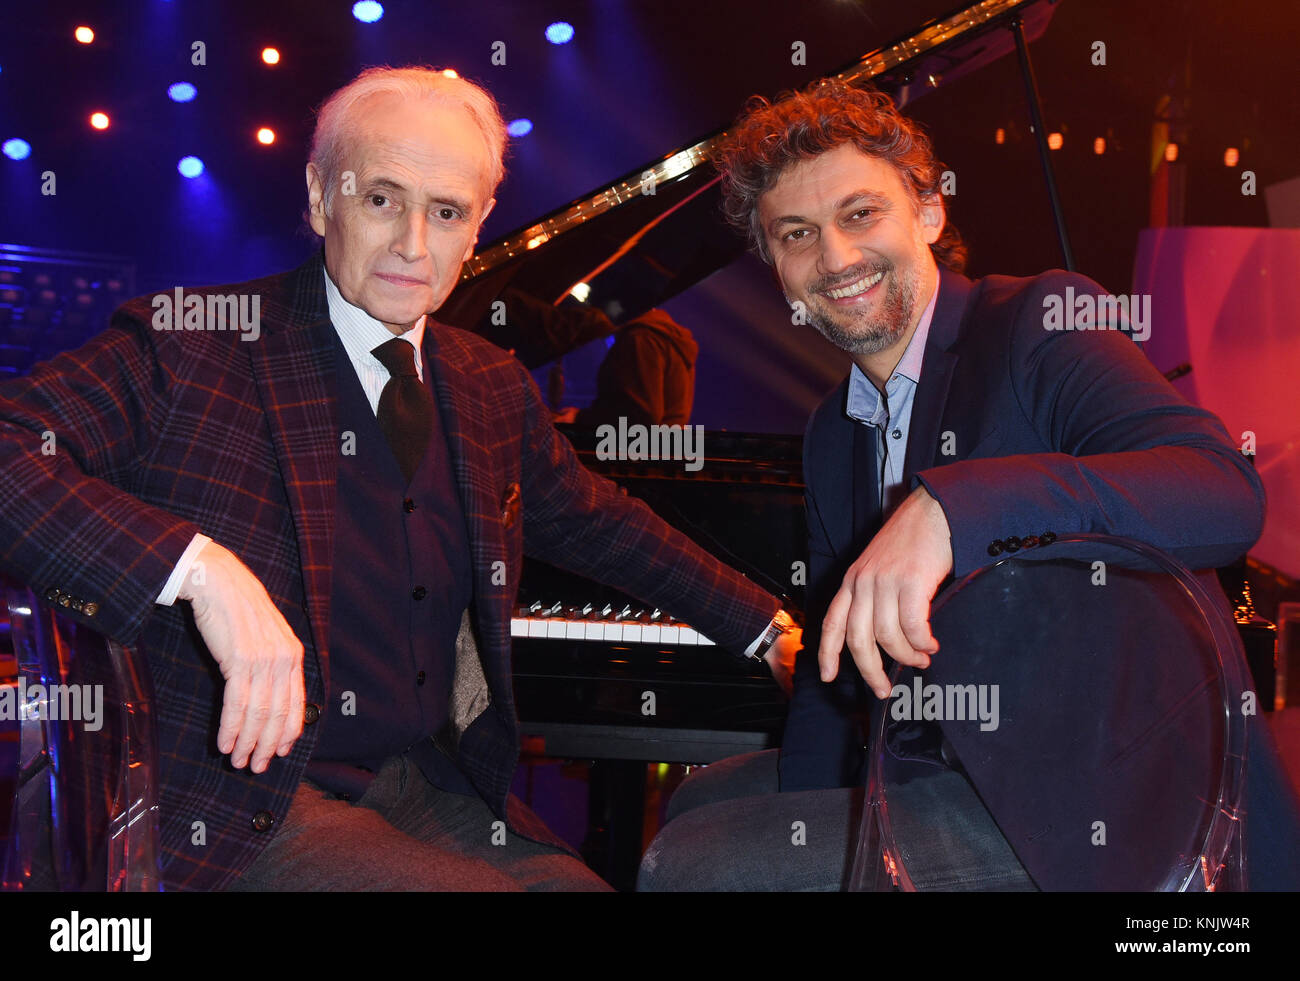 Munich, Germany. 12th Dec, 2017. Jose Carreras (L), spanish opera singer and founder of the 'José Carreras Leukaemia Foundation' and Jonas Kaufmann, opera singer and foundation ambassador, sit by a grand piano during rehearsals for the 'Jose Carreras Gala' in the Bavaria Studios in Munich, Germany, 12 December 2017. The gala is taking place on 14 December 2017. Credit: Ursula Düren/dpa/Alamy Live News Stock Photo